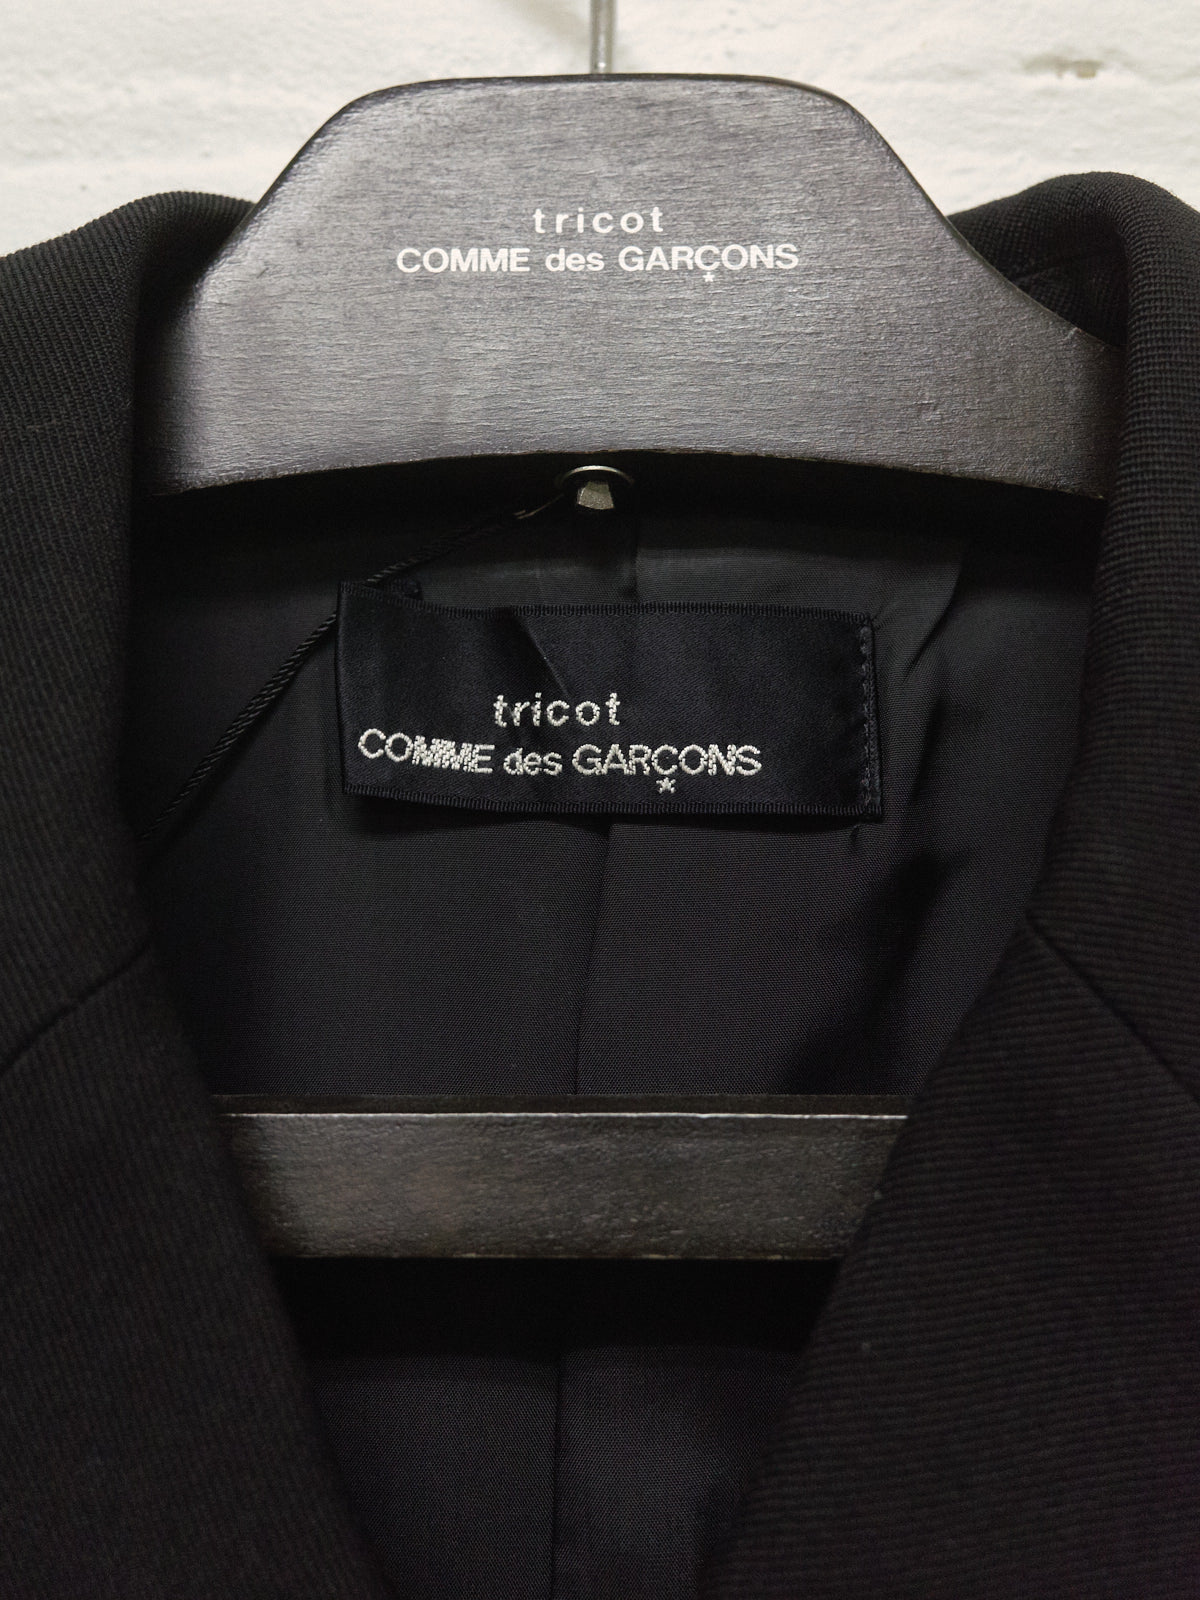 tricot comme des garcons black wool gabardine boxy double breasted pea coat  - 1990s